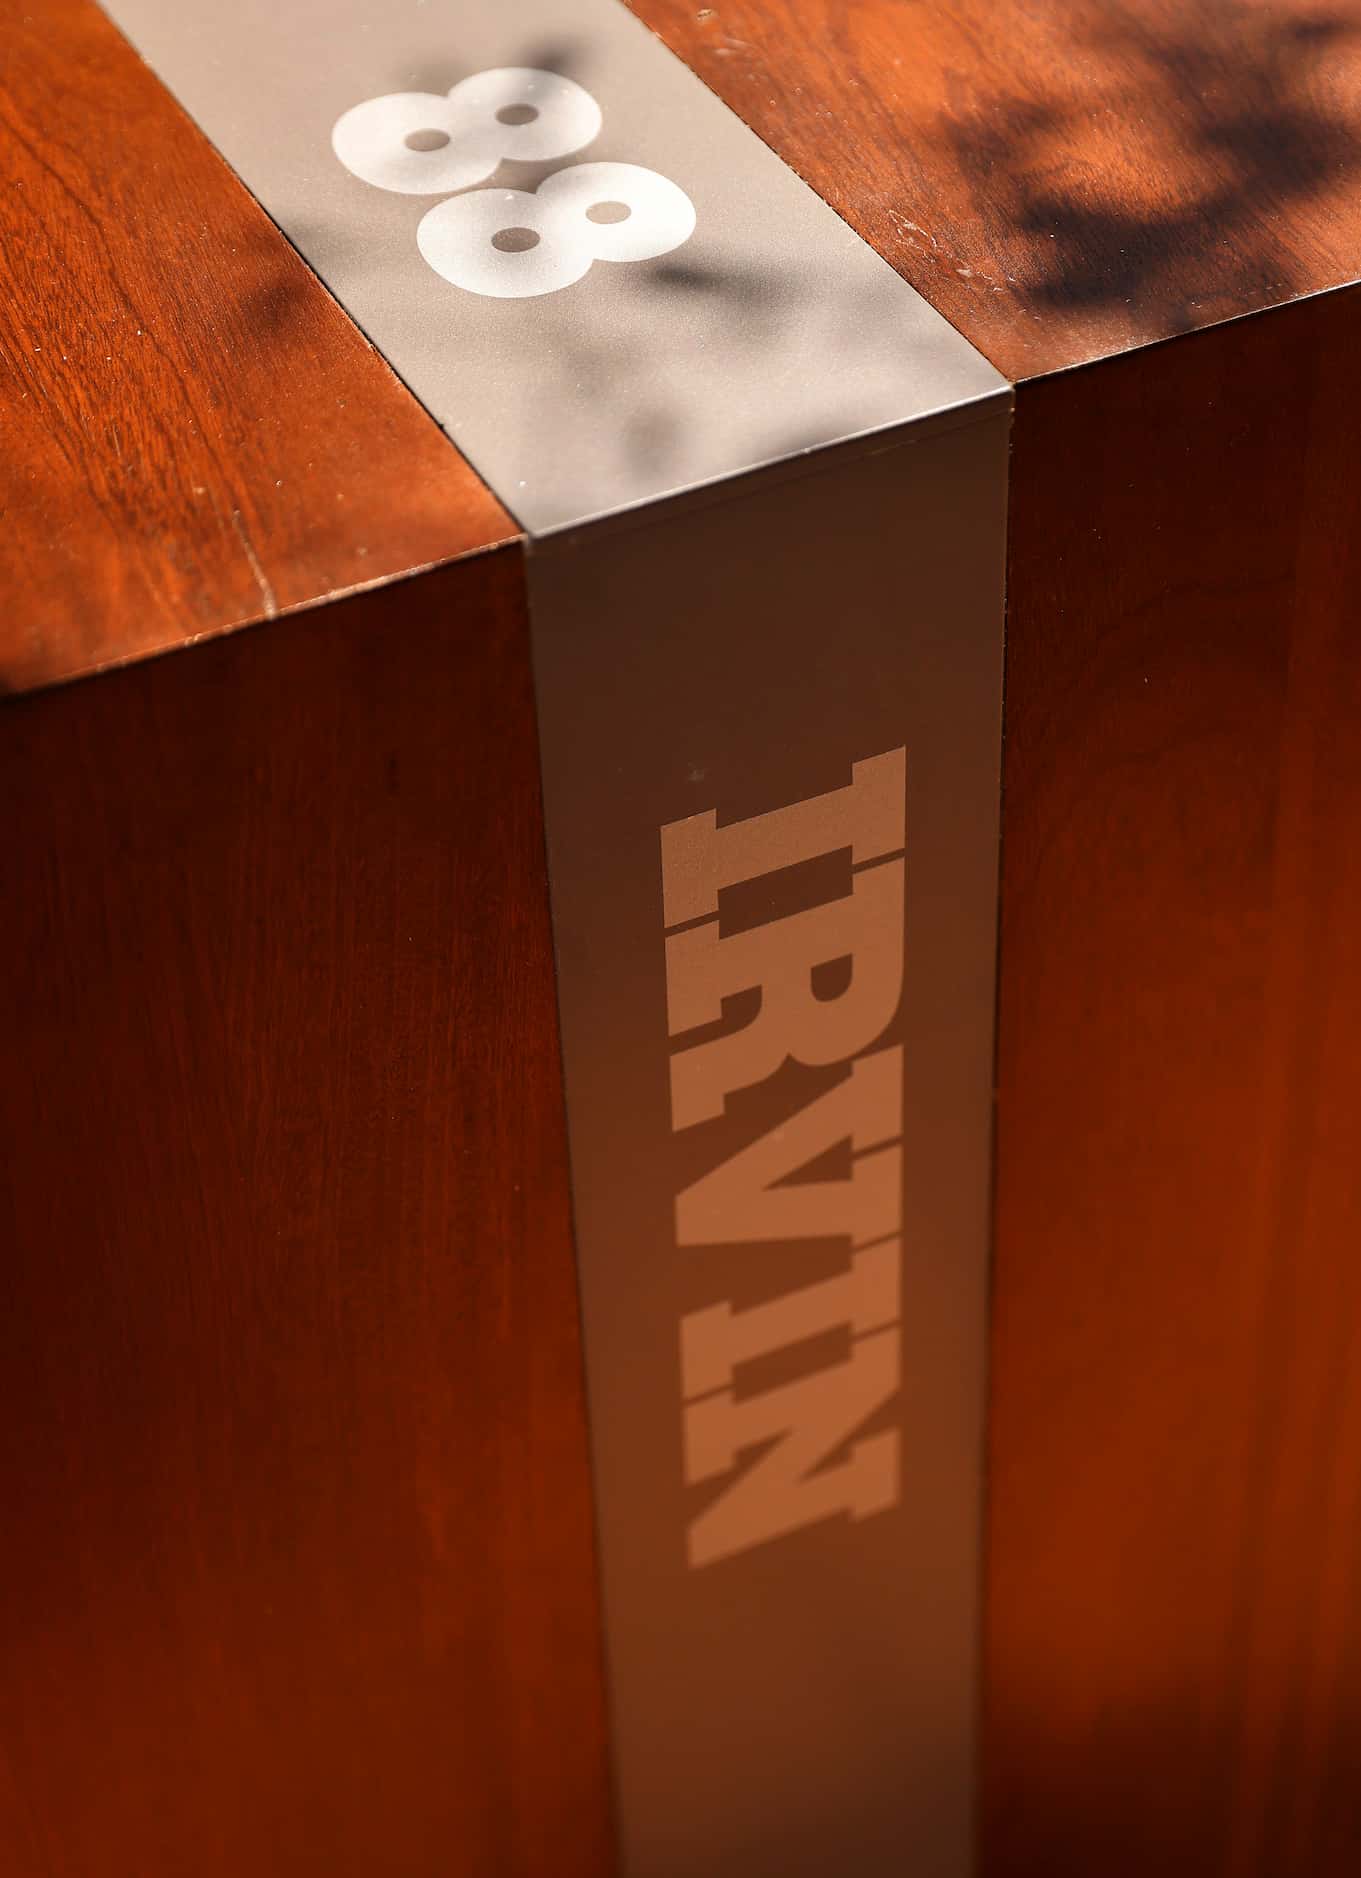 Wood tables are named for the Dallas Cowboys Ring of Honor members, including Michael Irvin,...